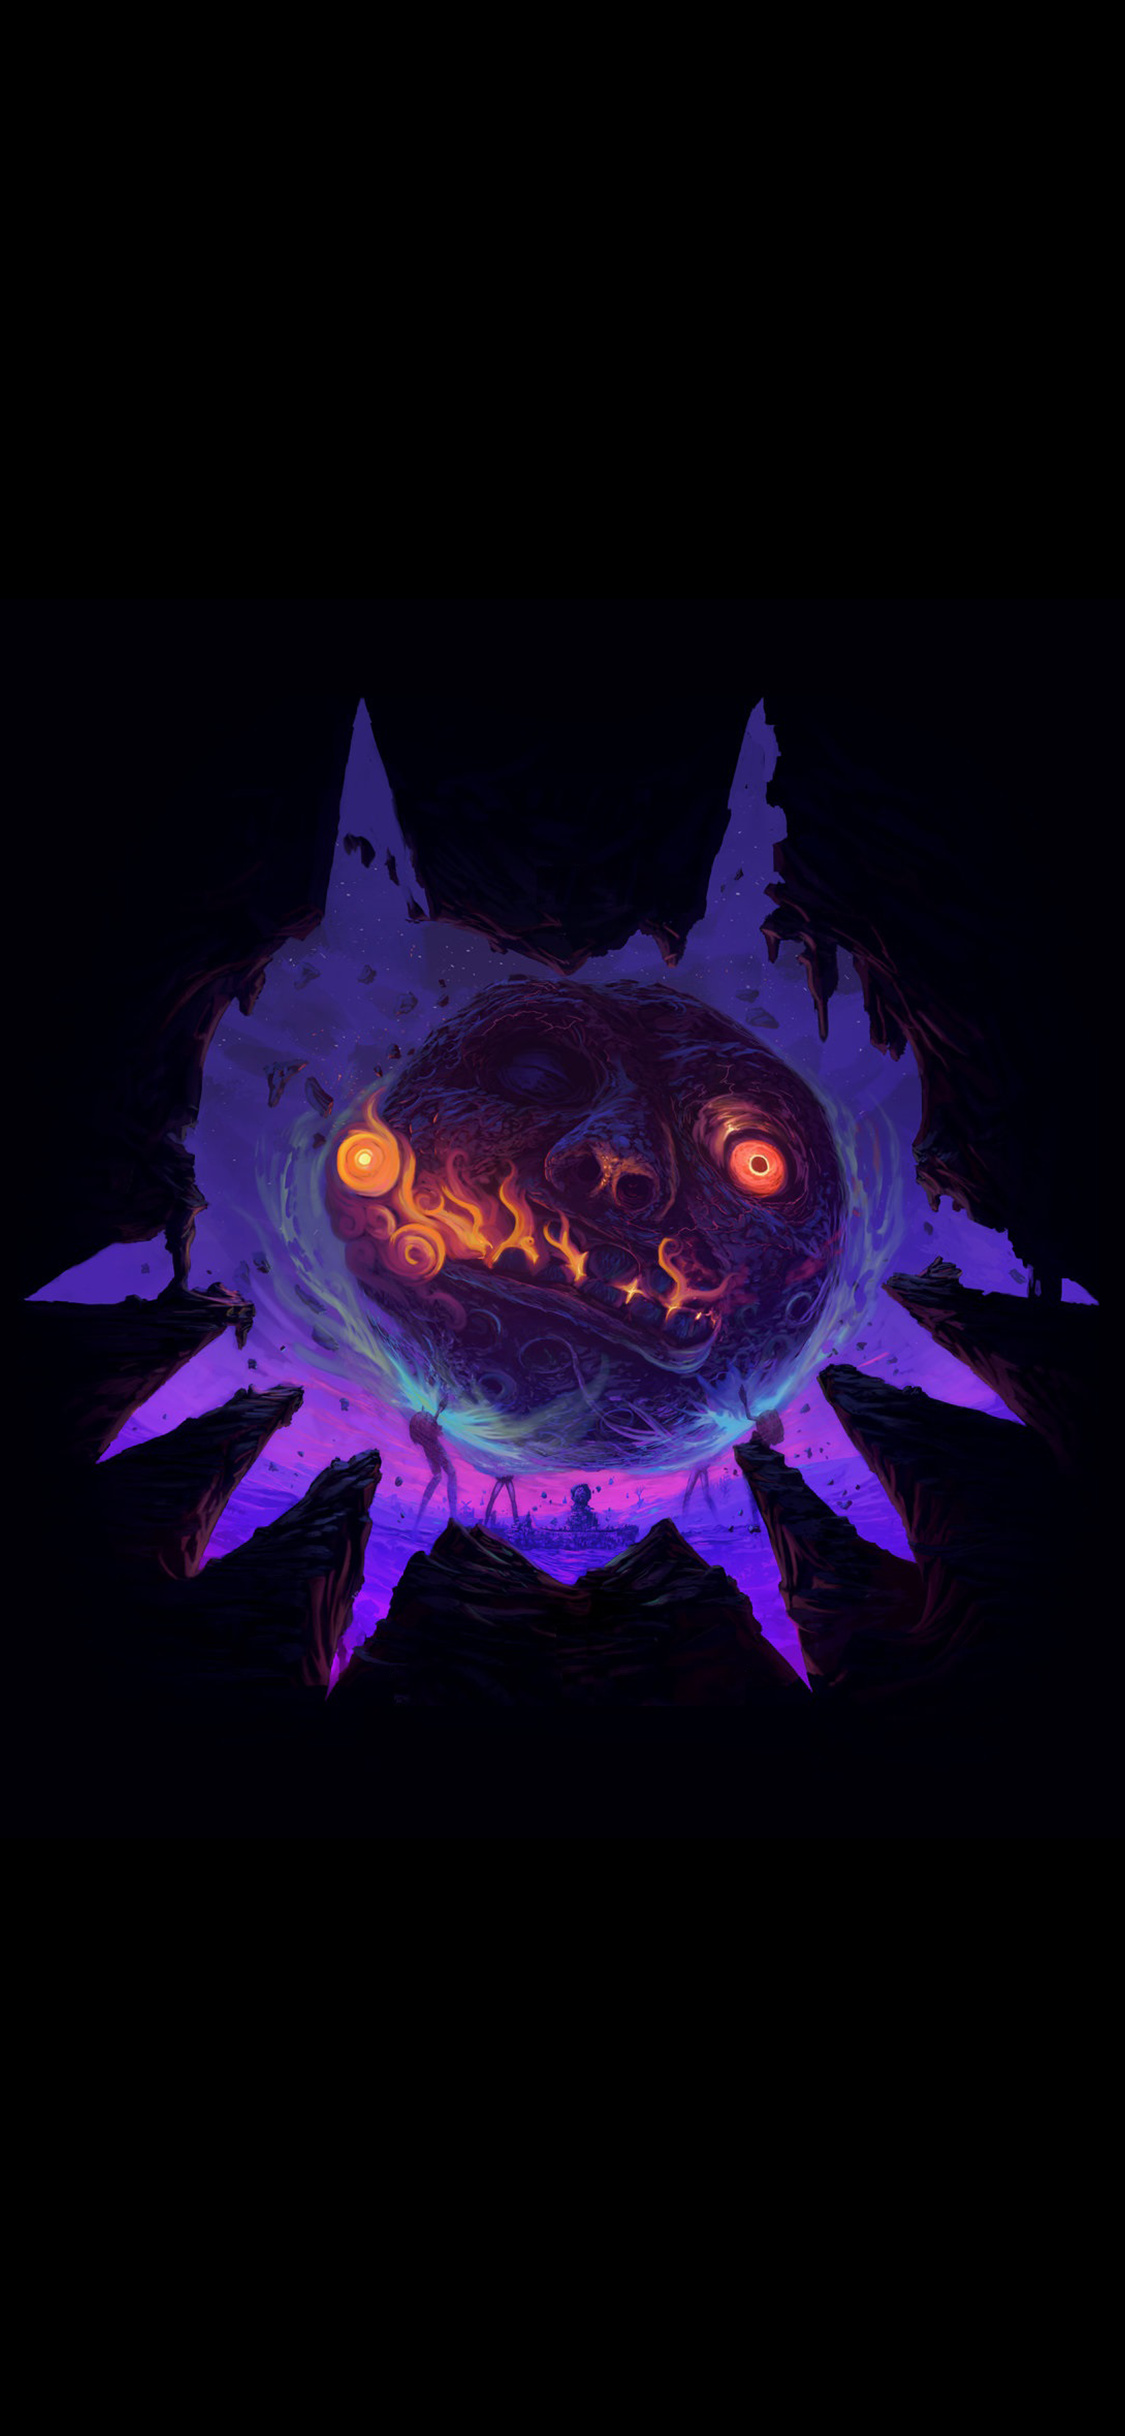 Majora's Mask wallpapers, Top free backgrounds, 1130x2440 HD Phone